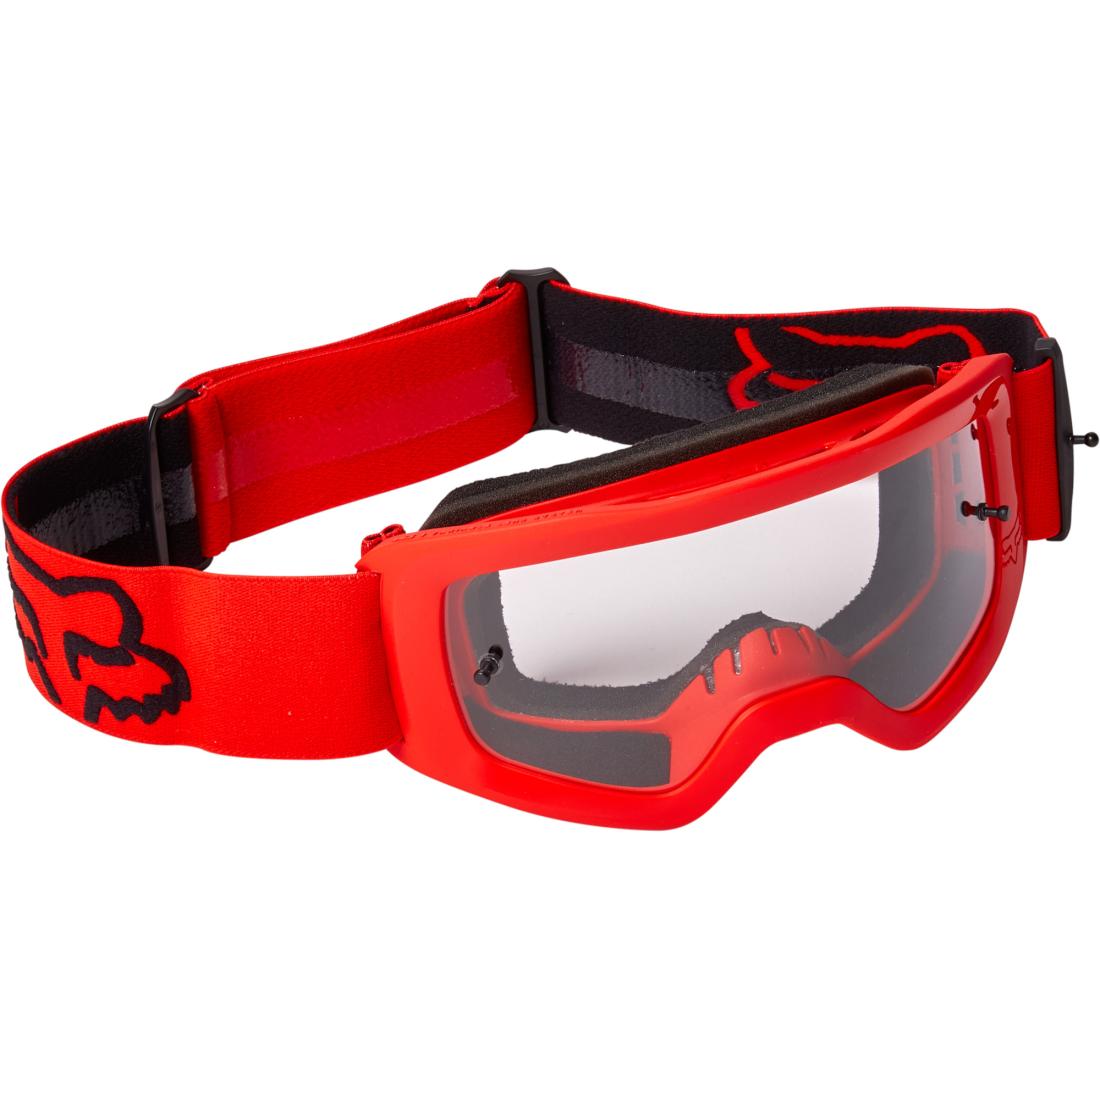 Yth Main Stray Goggle Fluo Red